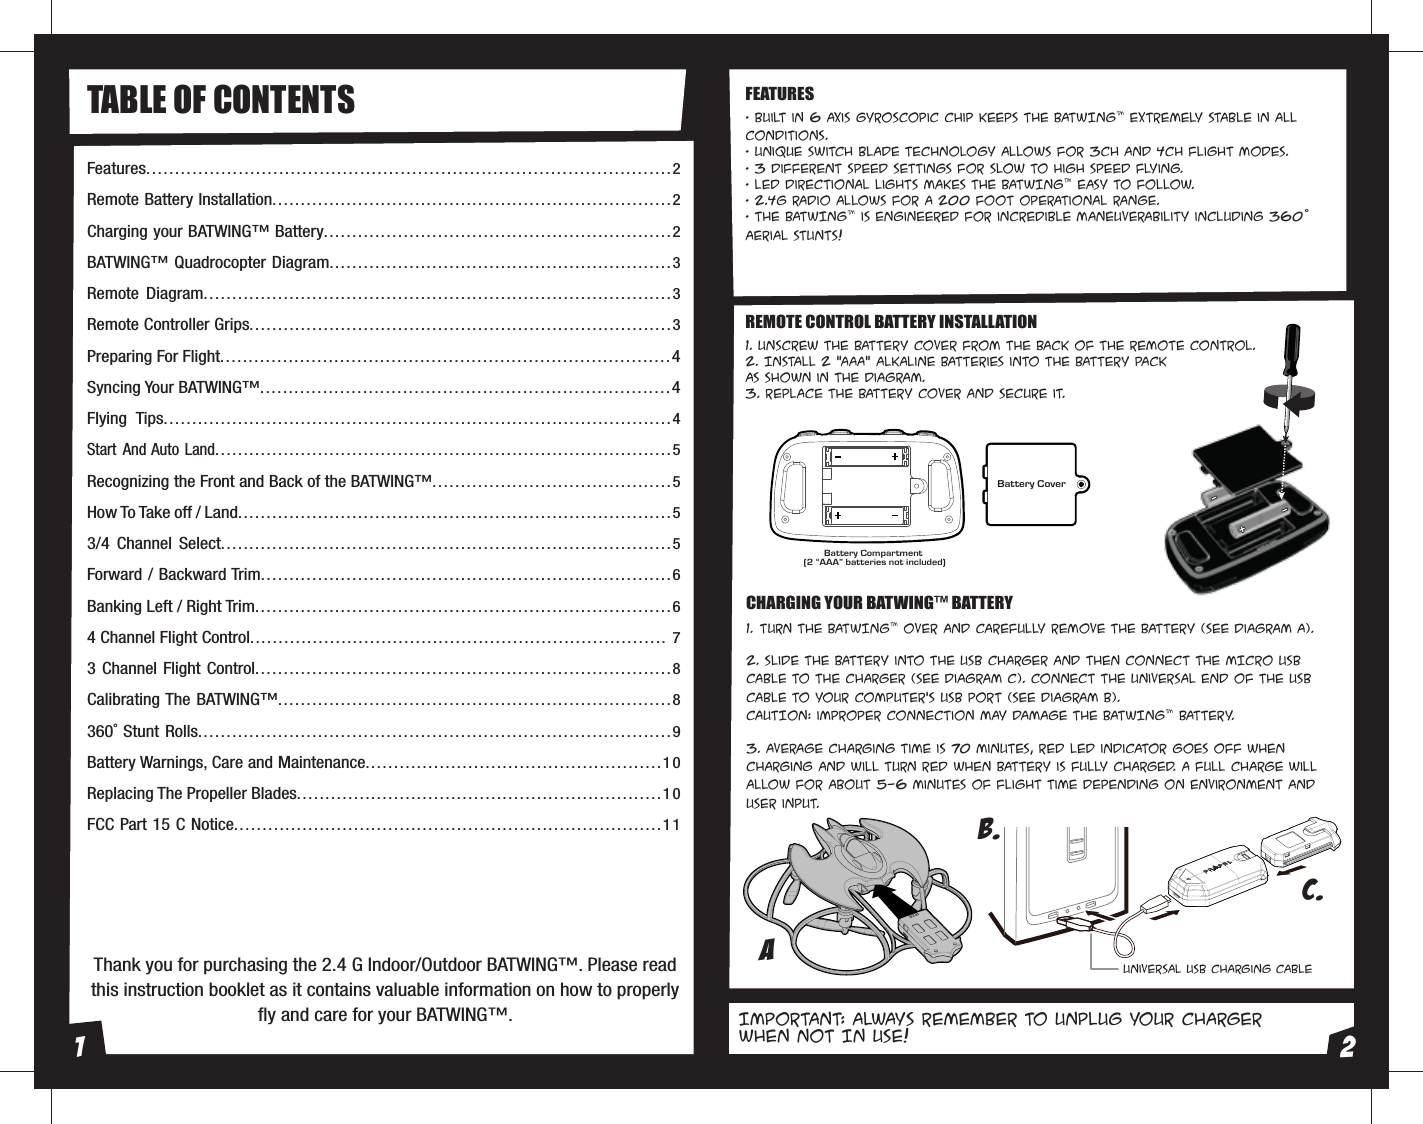 Thank you for purchasing the 2.4 G Indoor/Outdoor BATWING™. Please read this instruction booklet as it contains valuable information on how to properly fly and care for your BATWING™.Features...........................................................................................2Remote Battery Installation......................................................................2Charging your BATWING™ Battery............................................................. 2BATWING™ Quadrocopter Diagram............................................................3Remote Diagram..................................................................................3Remote Controller Grips..........................................................................3Preparing For Flight...............................................................................4Syncing Your BATWING™........................................................................4Flying Tips.........................................................................................4Start And Auto Land................................................................................5Recognizing the Front and Back of the BATWING™..........................................5How To Take off / Land............................................................................53/4 Channel Select...............................................................................5Forward / Backward Trim........................................................................6Banking Left / Right Trim.........................................................................64 Channel Flight Control......................................................................... 73 Channel Flight Control.........................................................................8Calibrating The BATWING™.....................................................................8360˚ Stunt Rolls...................................................................................9Battery Warnings, Care and Maintenance....................................................10Replacing The Propeller Blades................................................................10FCC Part 15 C Notice...........................................................................11Battery Compartment (2 “AAA” batteries not included)Battery CoverTABLE OF CONTENTS• Built in 6 axis gyroscopic chip keeps the BATWING™ extremely stable in all conditions.• Unique switch blade technology allows for 3ch and 4ch flight modes.• 3 different speed settings for slow to high speed flying.• LED directional lights makes the BATWING™ easy to follow.• 2.4G radio allows for a 200 foot operational range.• The BATWING™ is engineered for incredible maneuverability including 360˚ aerial stunts!1. Unscrew the battery cover from the back of the remote control.2. Install 2 “AAA” alkaline batteries into the battery pack as shown in the diagram.3. Replace the battery cover and secure it. 1.  Turn the BATWING™ over and carefully remove the battery (see diagram A). 2. Slide the battery into the USB charger and then connect the MICRO USB cable to the charger (see diagram C). Connect the universal end of the USB cable to your computer’s USB port (see diagram B).CAUTION: improper connection may damage the BATWING™ battery.3. Average charging time is 70 minutes, RED LED indicator goes off when charging and will turn RED when battery is fully charged. A full charge will allow for about 5-6 minutes of flight time depending on environment and user input.REMOTE CONTROL BATTERY INSTALLATIONFEATURESCHARGING YOUR BATWING™ BATTERYIMPORTANT: ALWAYS REMEMBER TO UNPLUG YOUR CHARGer WHEN NOT IN USE!B.C.Universal USB Charging CableA1 2